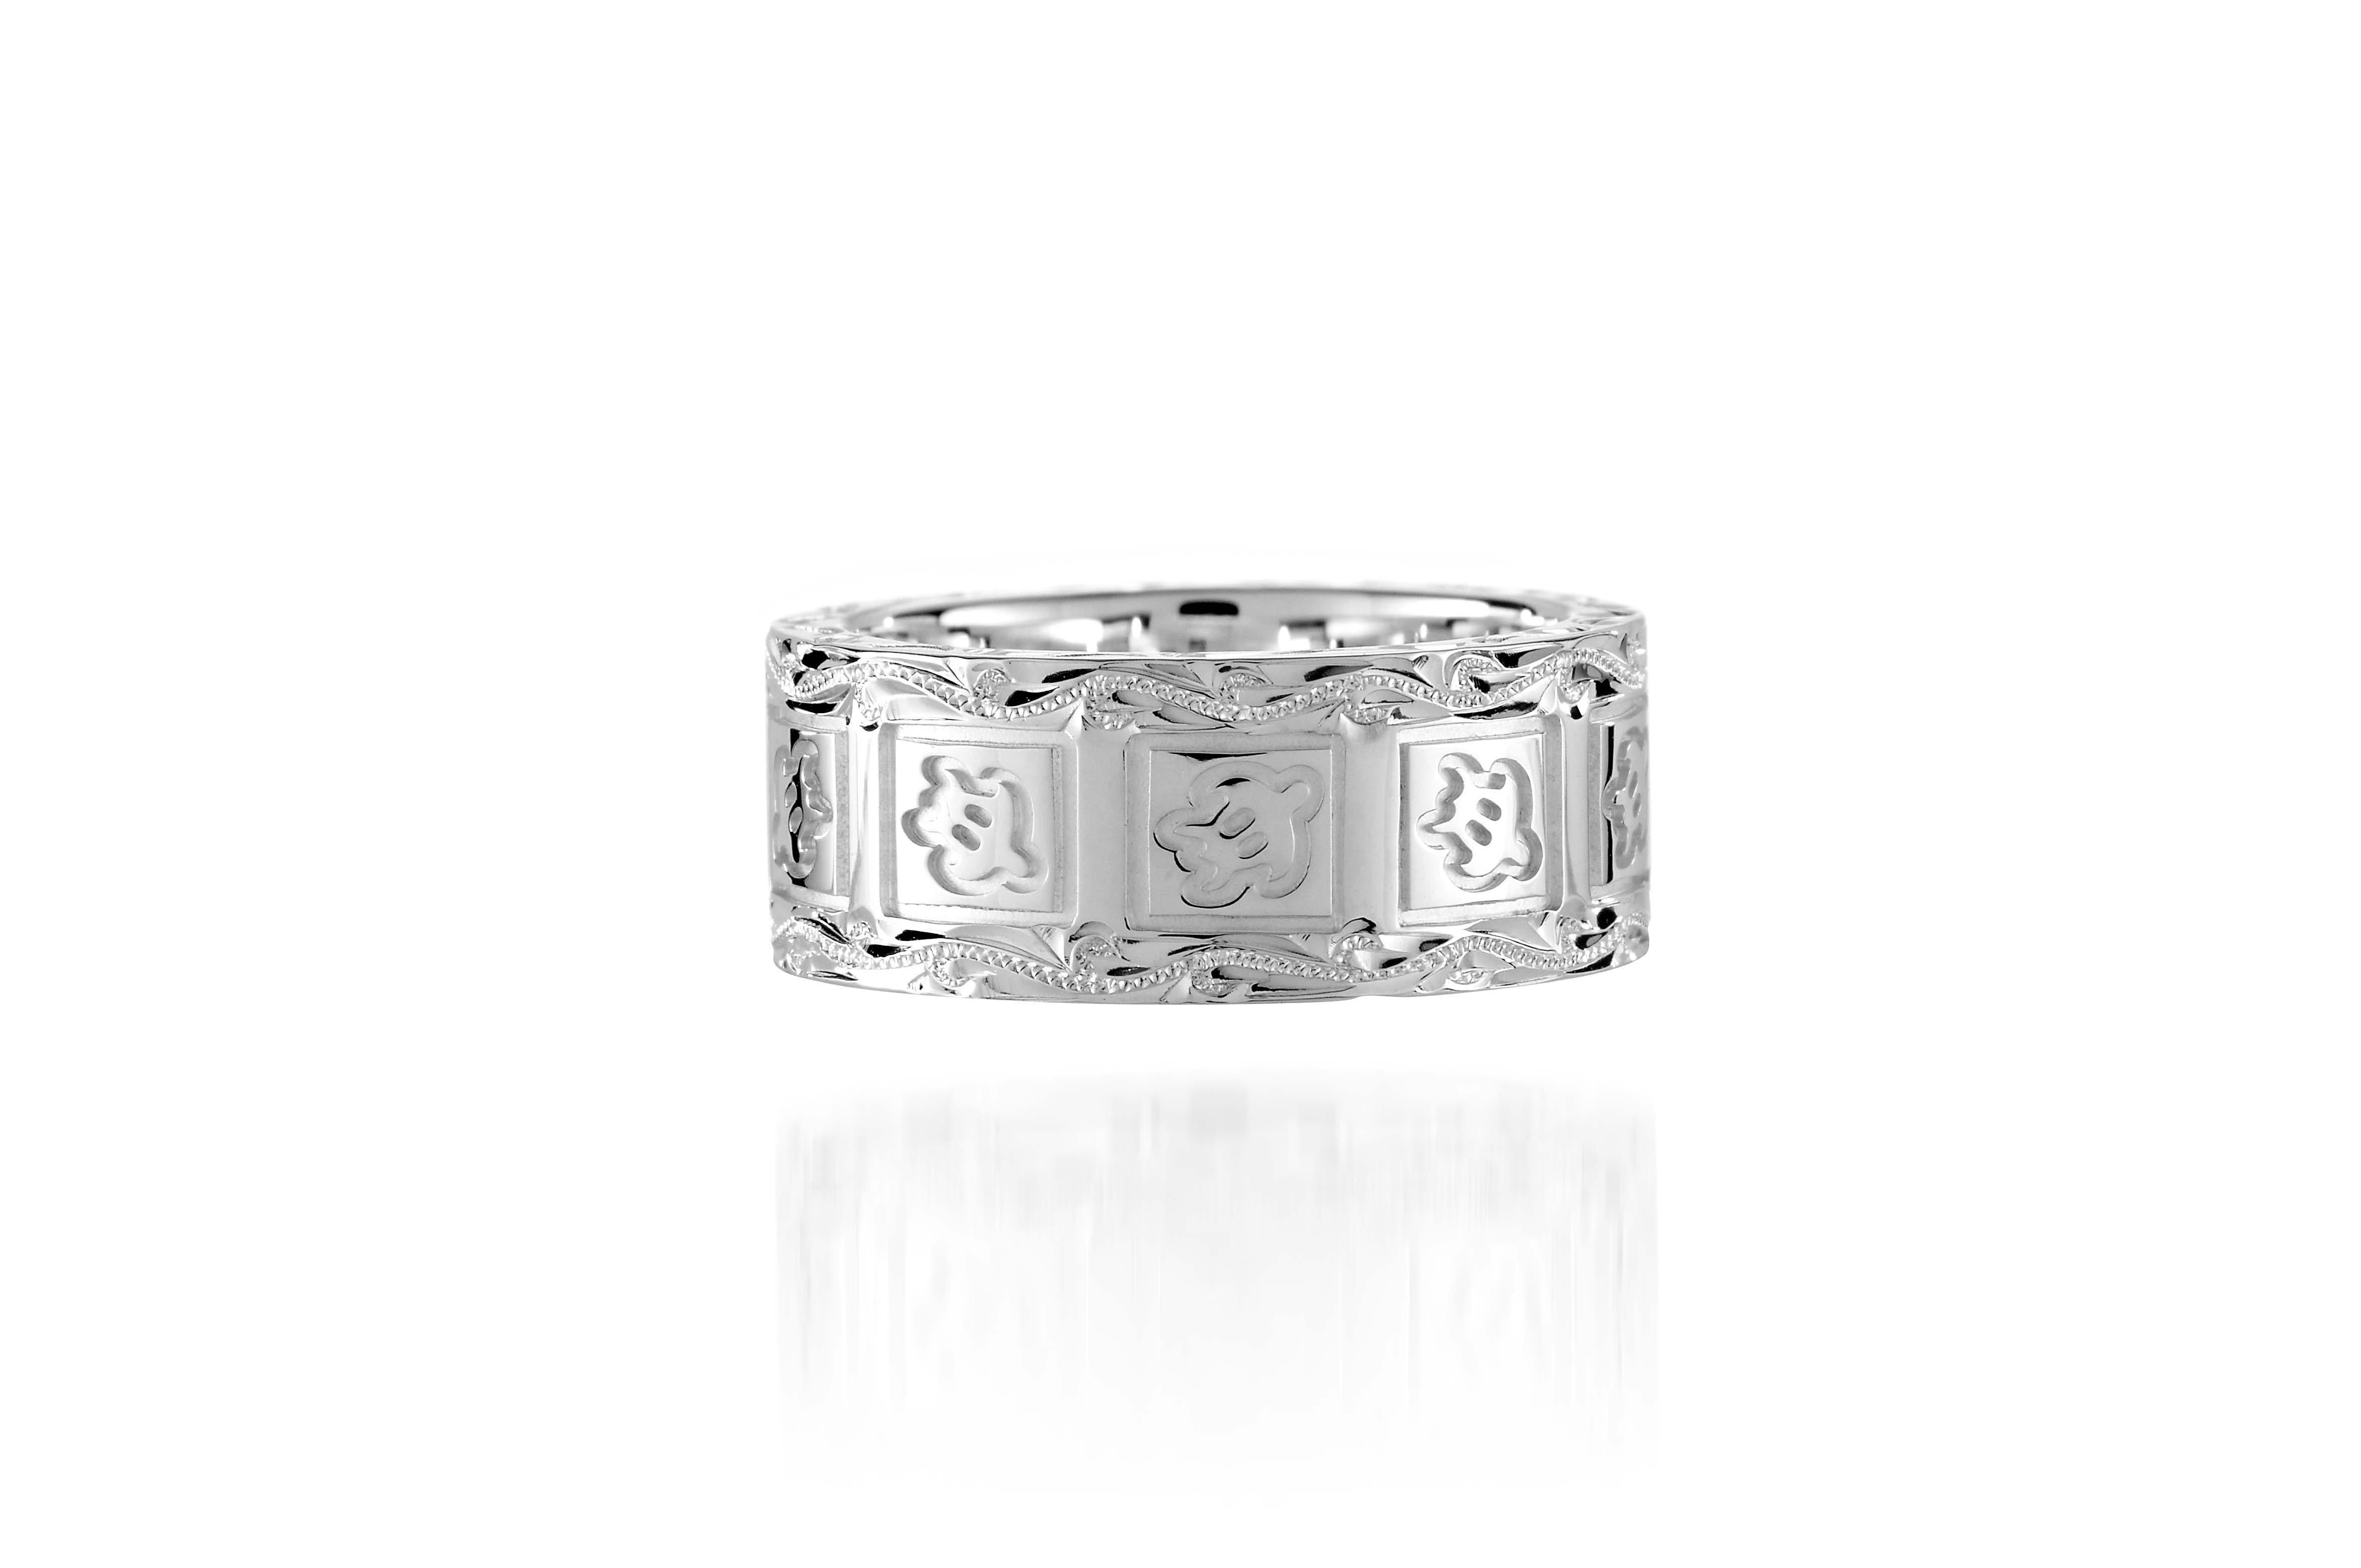 The picture shows a 925 sterling silver 8mm ring with hand engravings including sea turtles